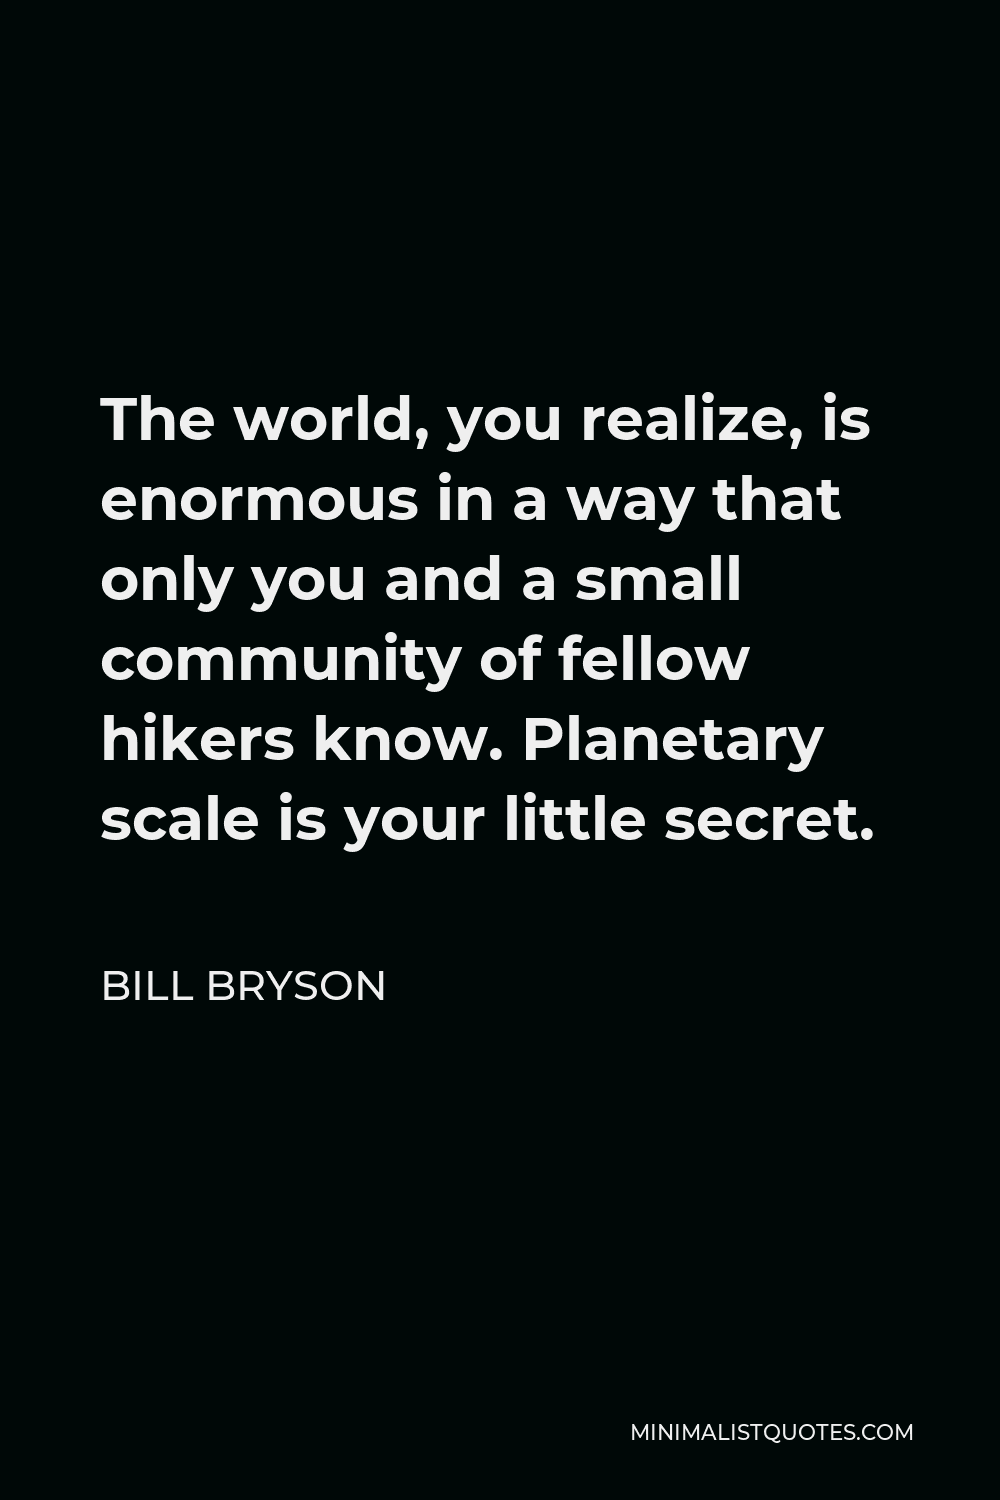 Bill Bryson Quote - The world, you realize, is enormous in a way that only you and a small community of fellow hikers know. Planetary scale is your little secret.